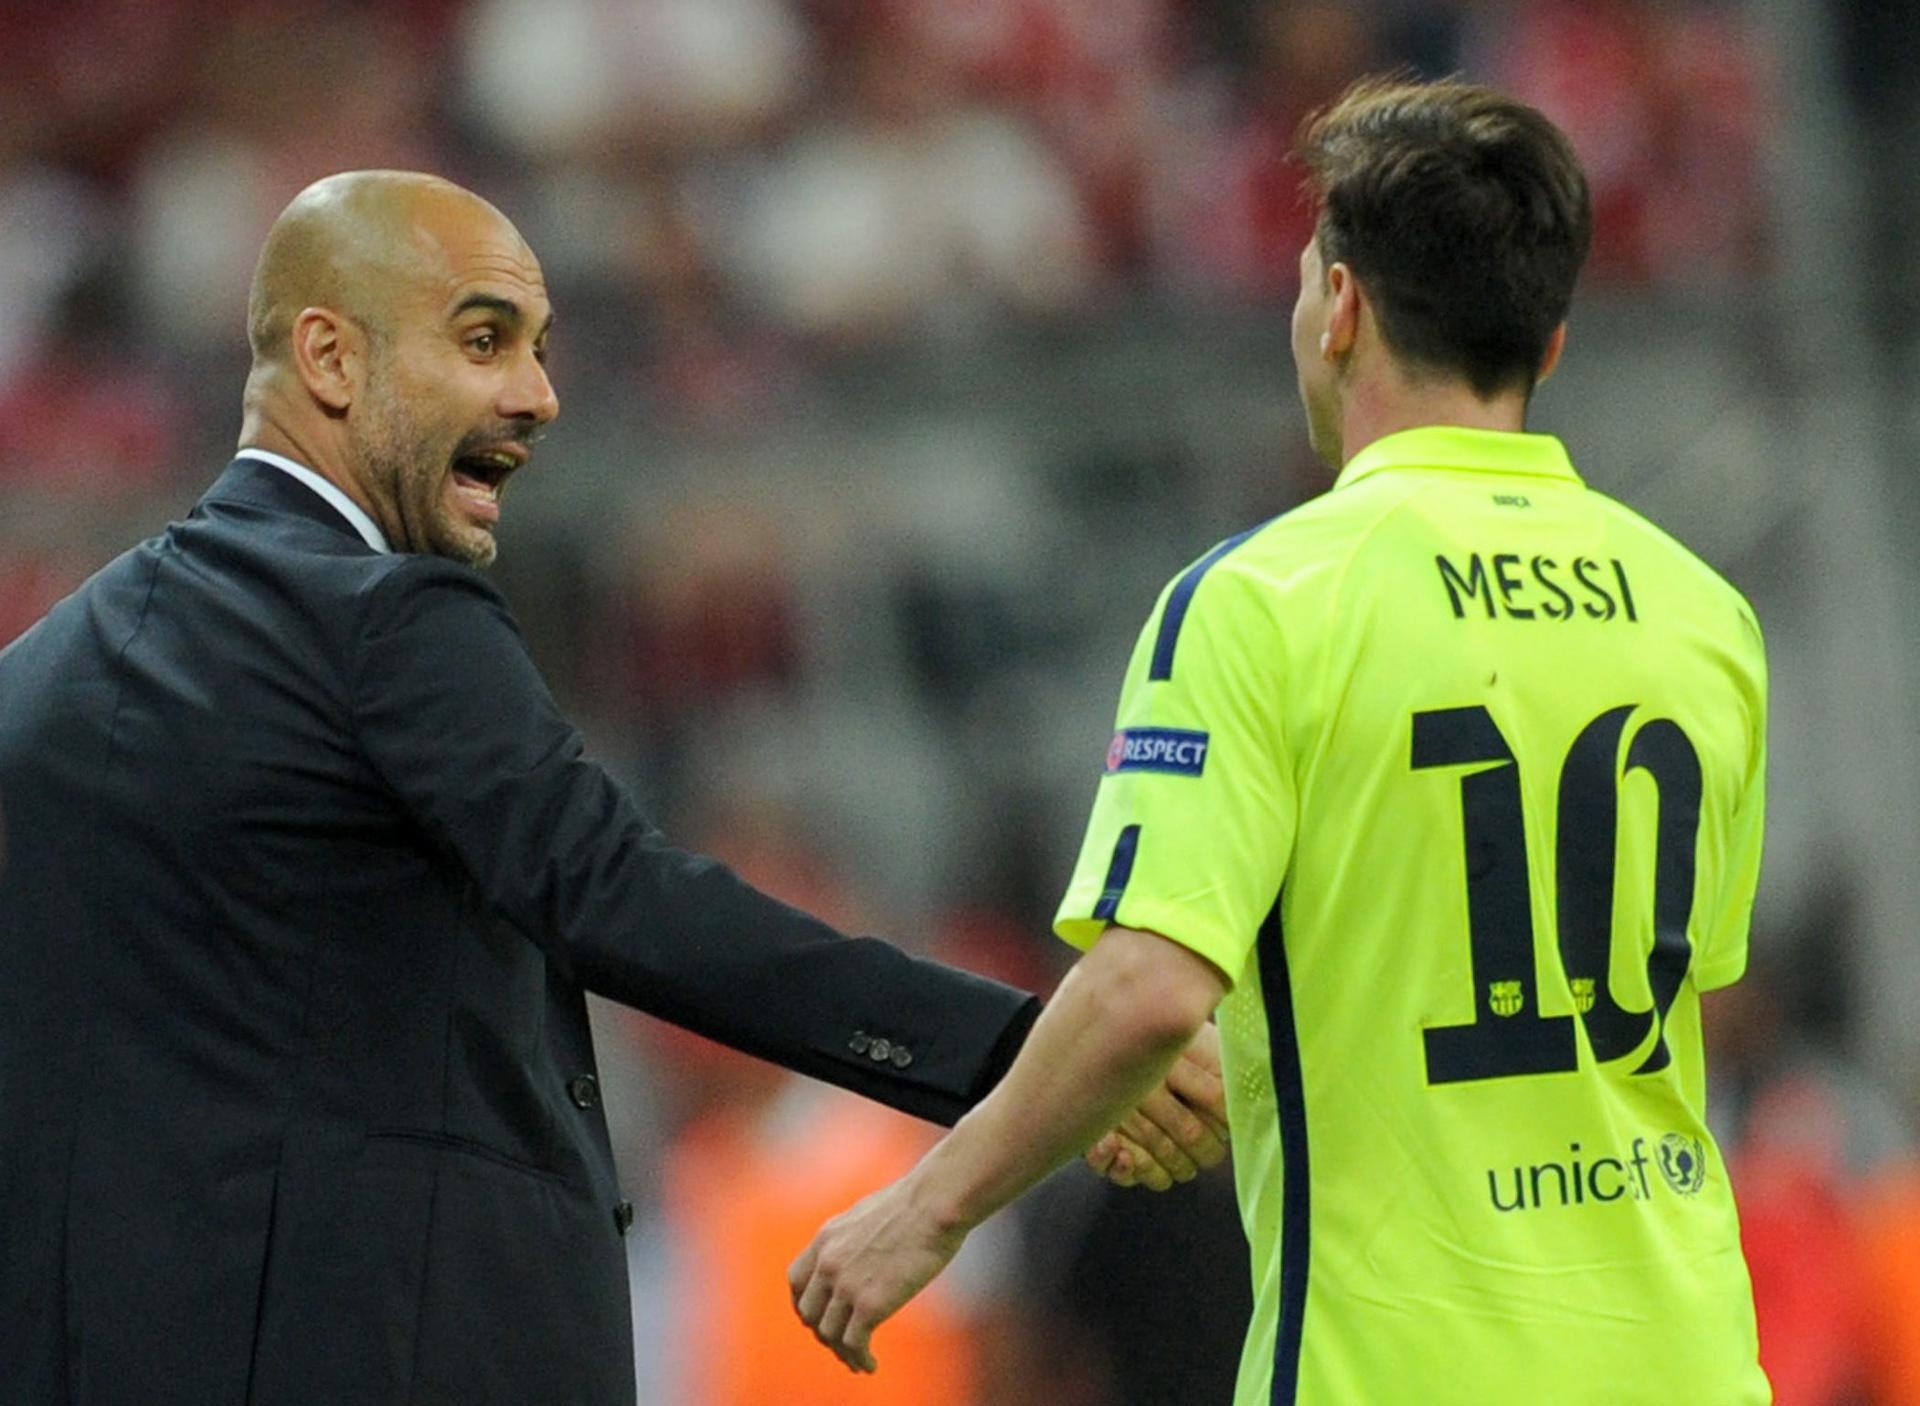 Guardiola compares City's UCL glory to Messi winning World Cup